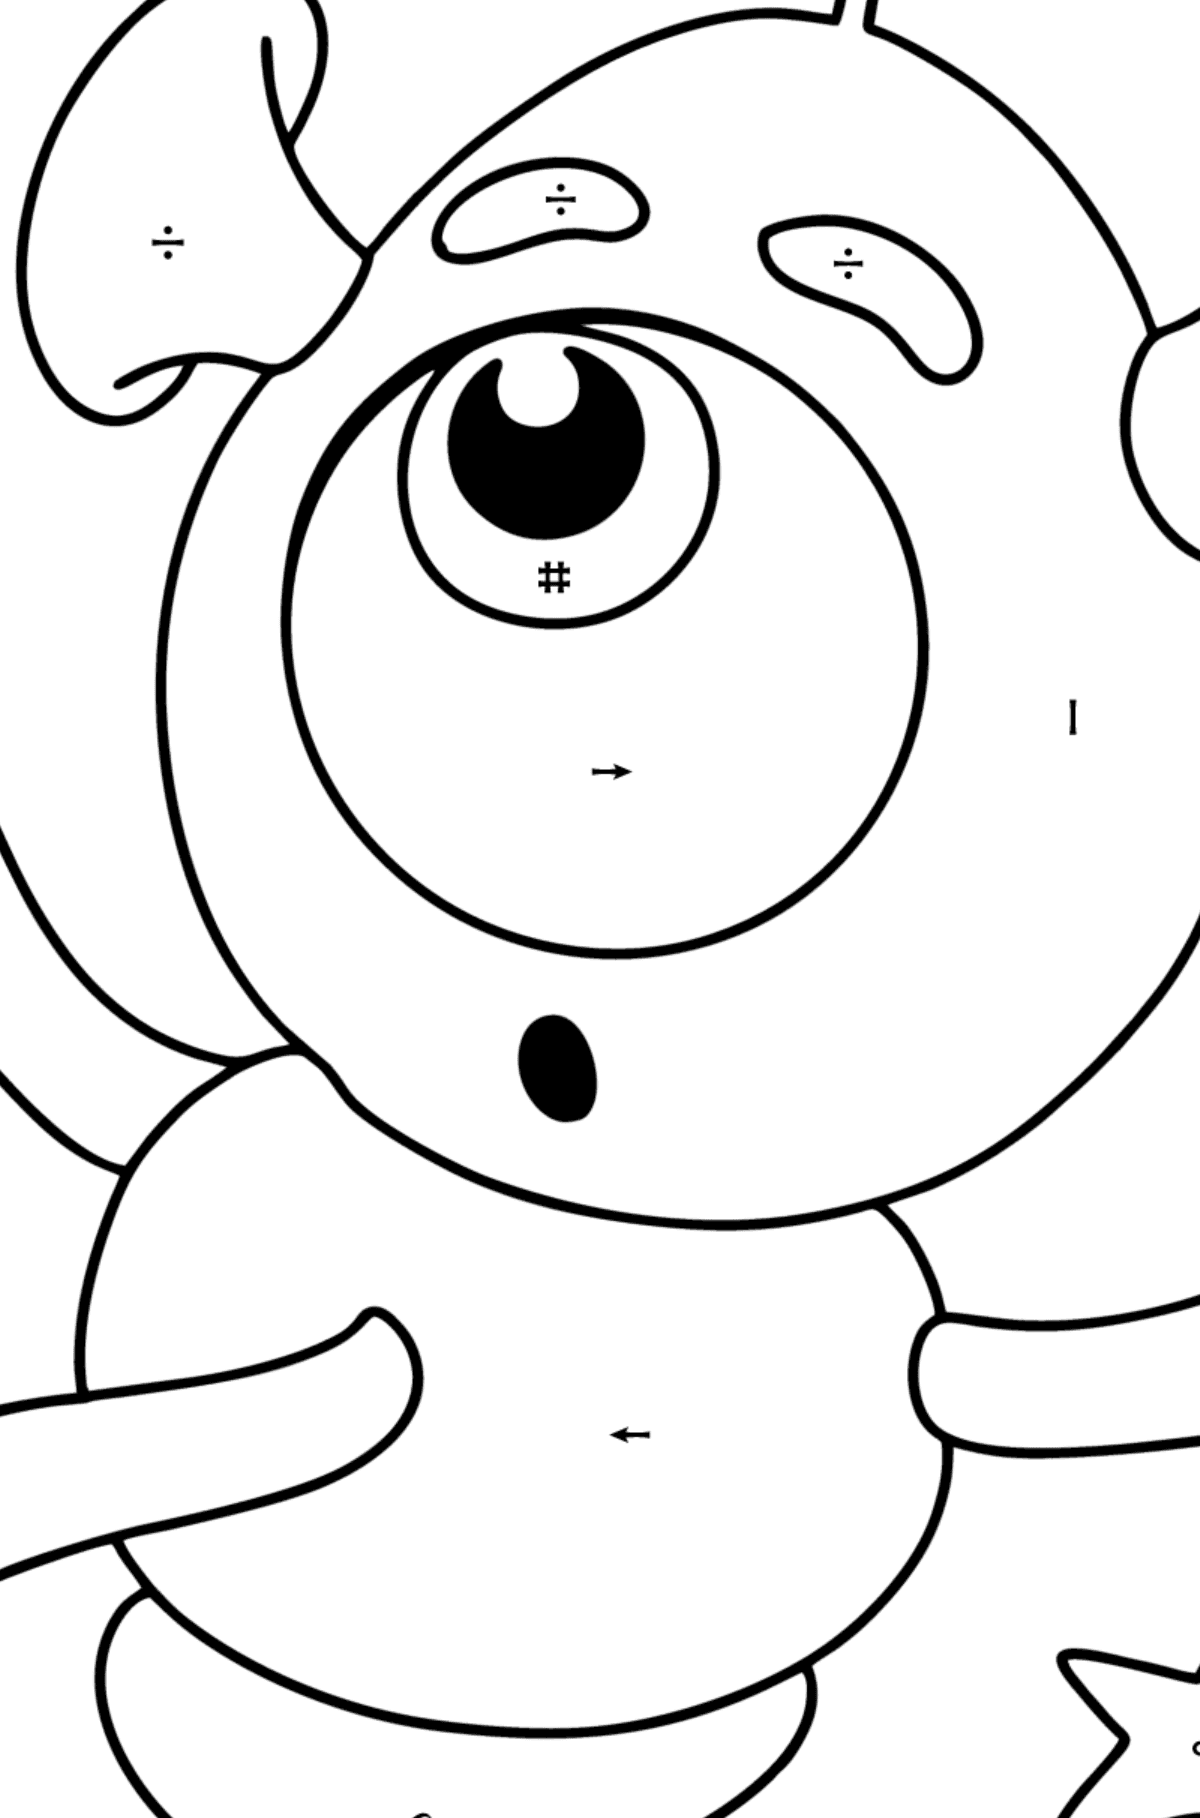 Little Alien Coloring page - Coloring by Symbols for Kids